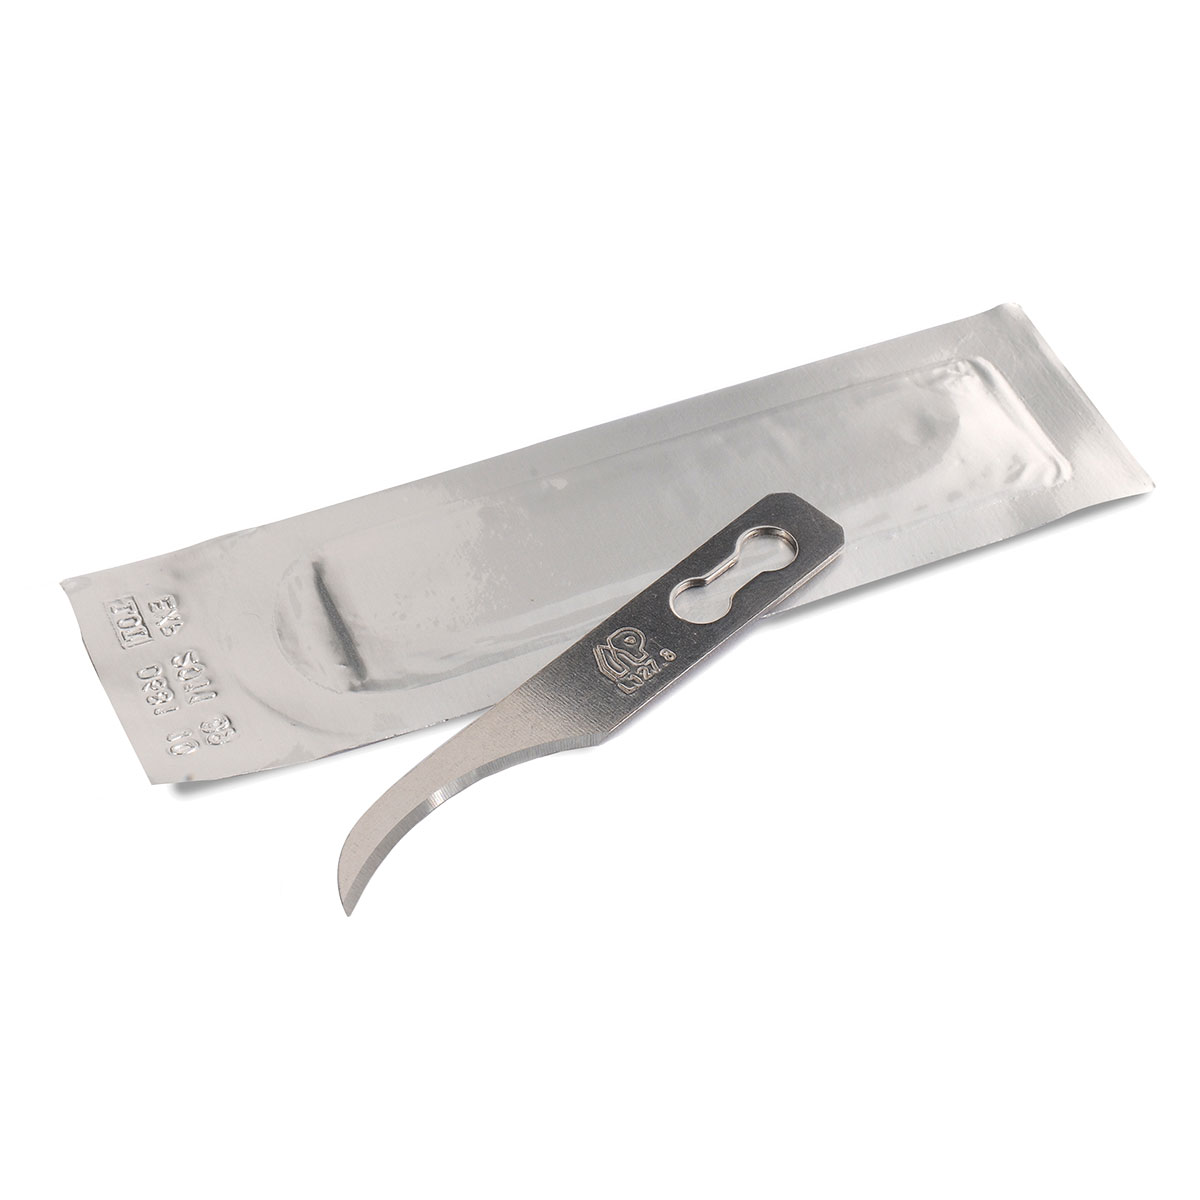 blade with concave cutting edge for the foil knife s1096